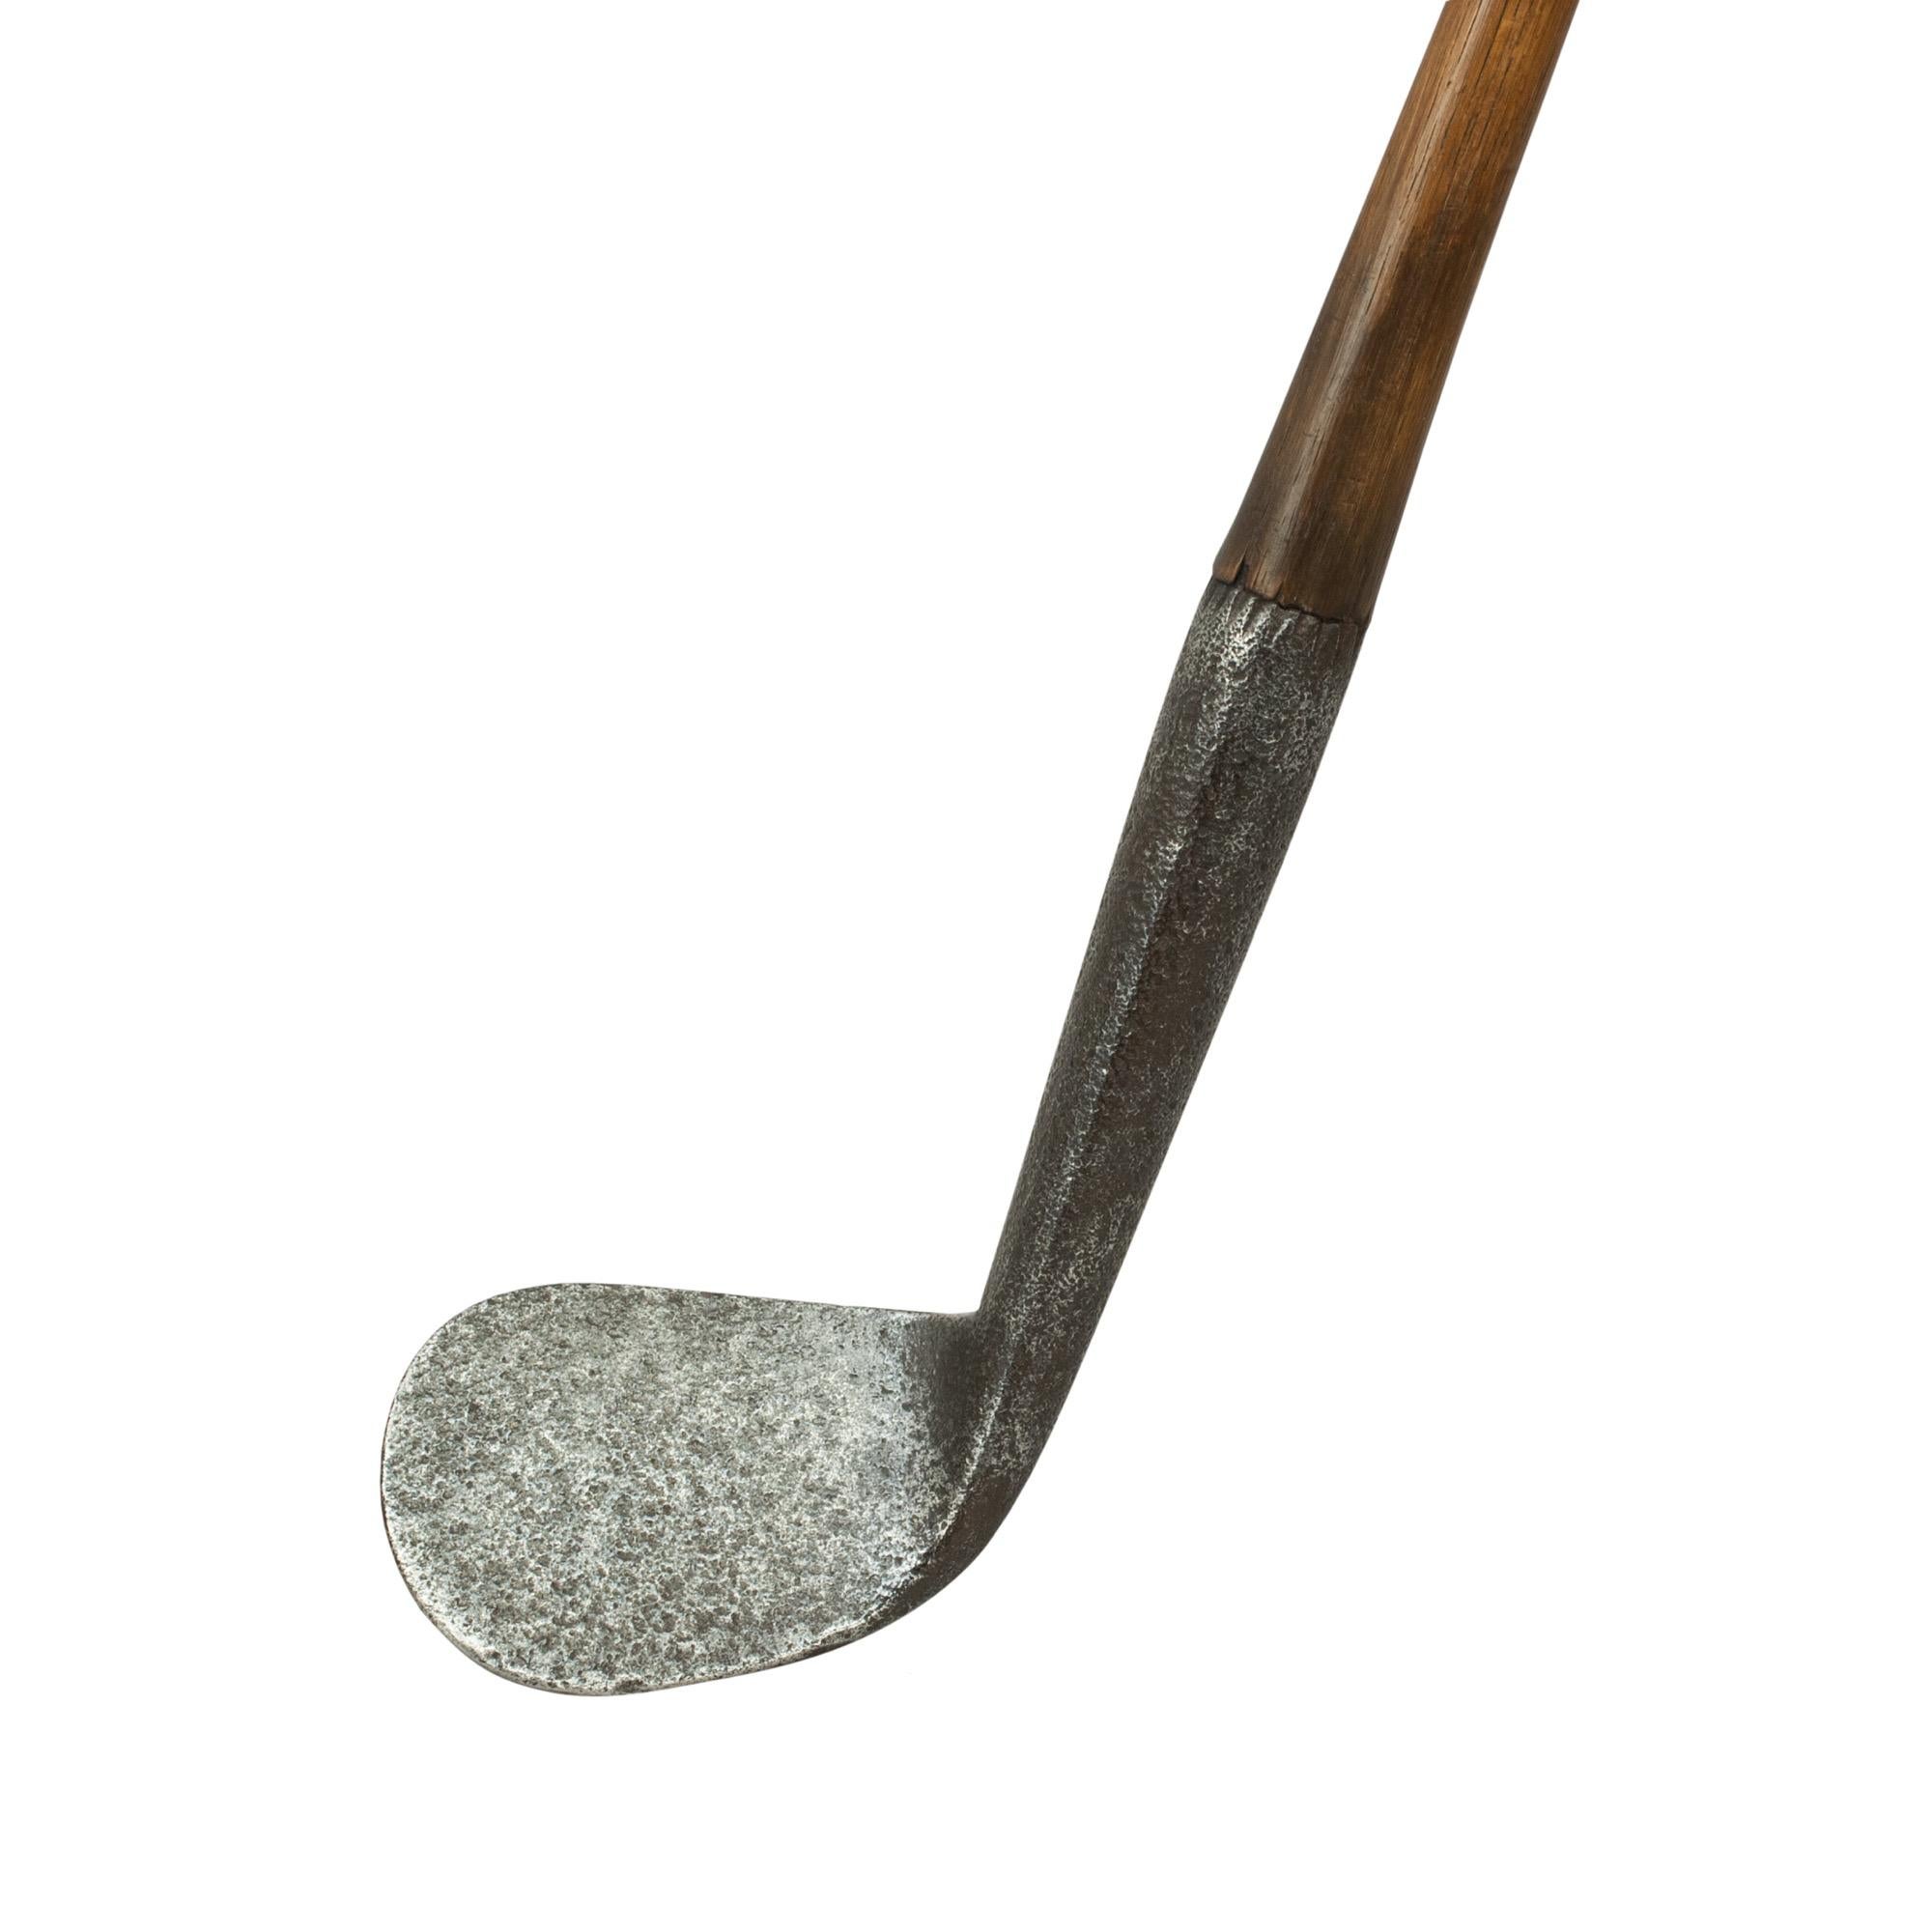 Robert white hickory shafted rut iron.
A good quality smooth faced rut or track iron golf club with hickory shaft with sheep skin grip. The head stamped on the back 'R. White, Maker, St Andrews'. A nice desirable golf collectable. The club head has